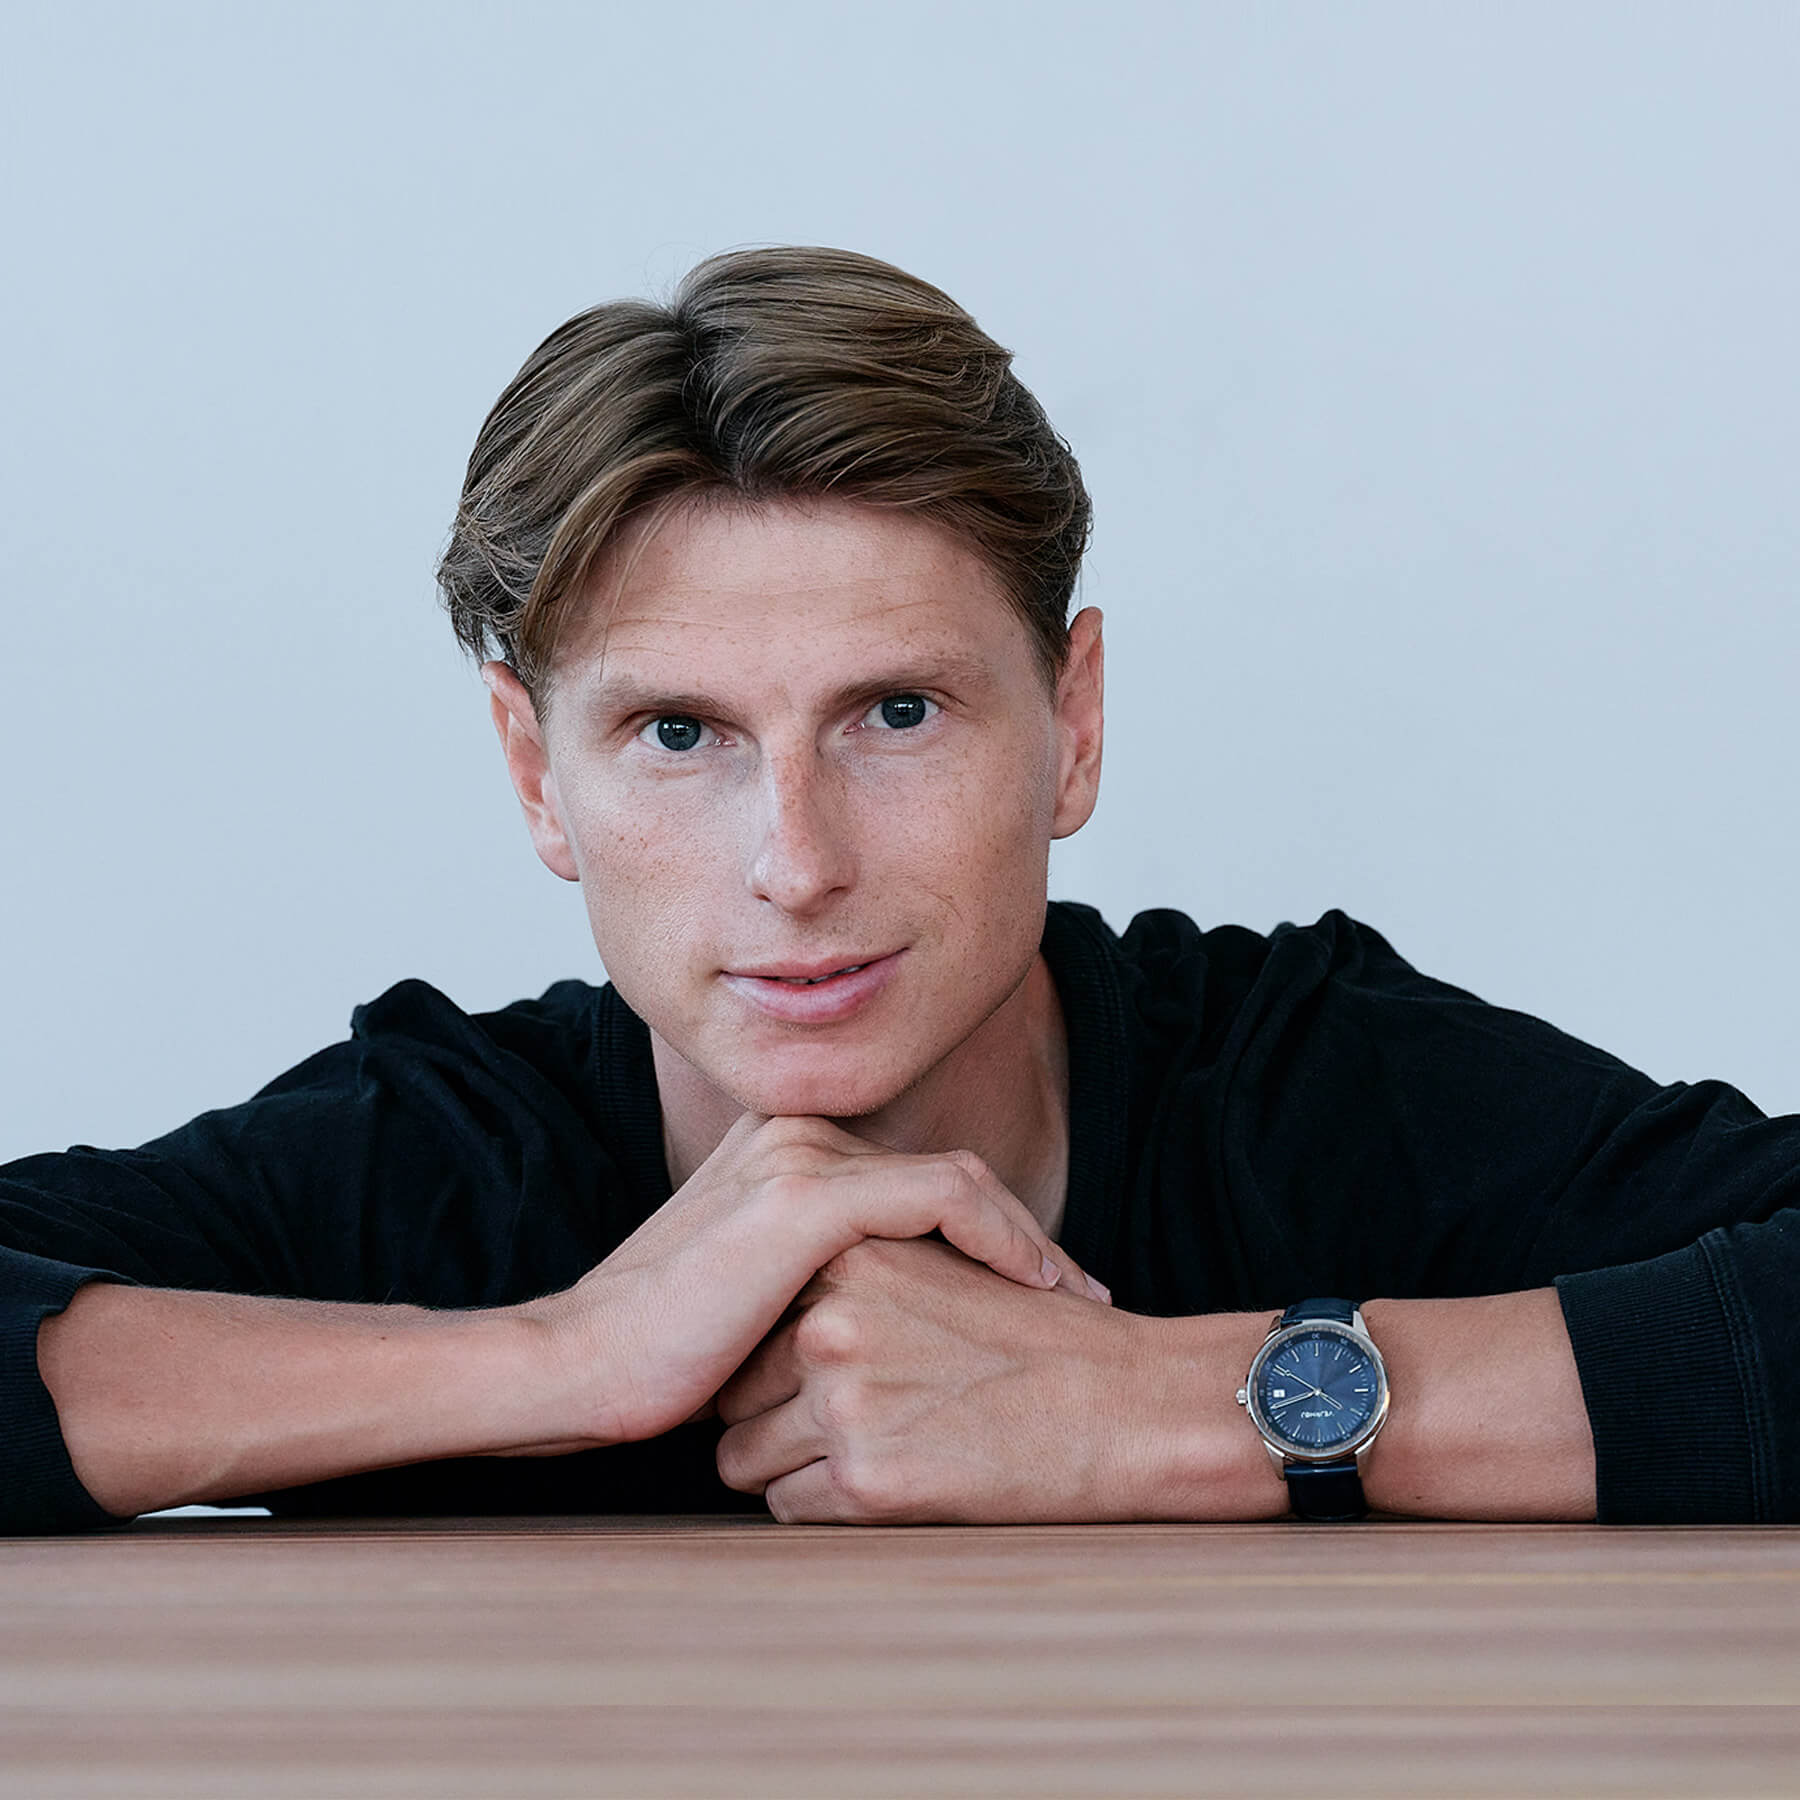 Soccer Player Kasper Junker wearing a blue automatic watch while starting into the kamera